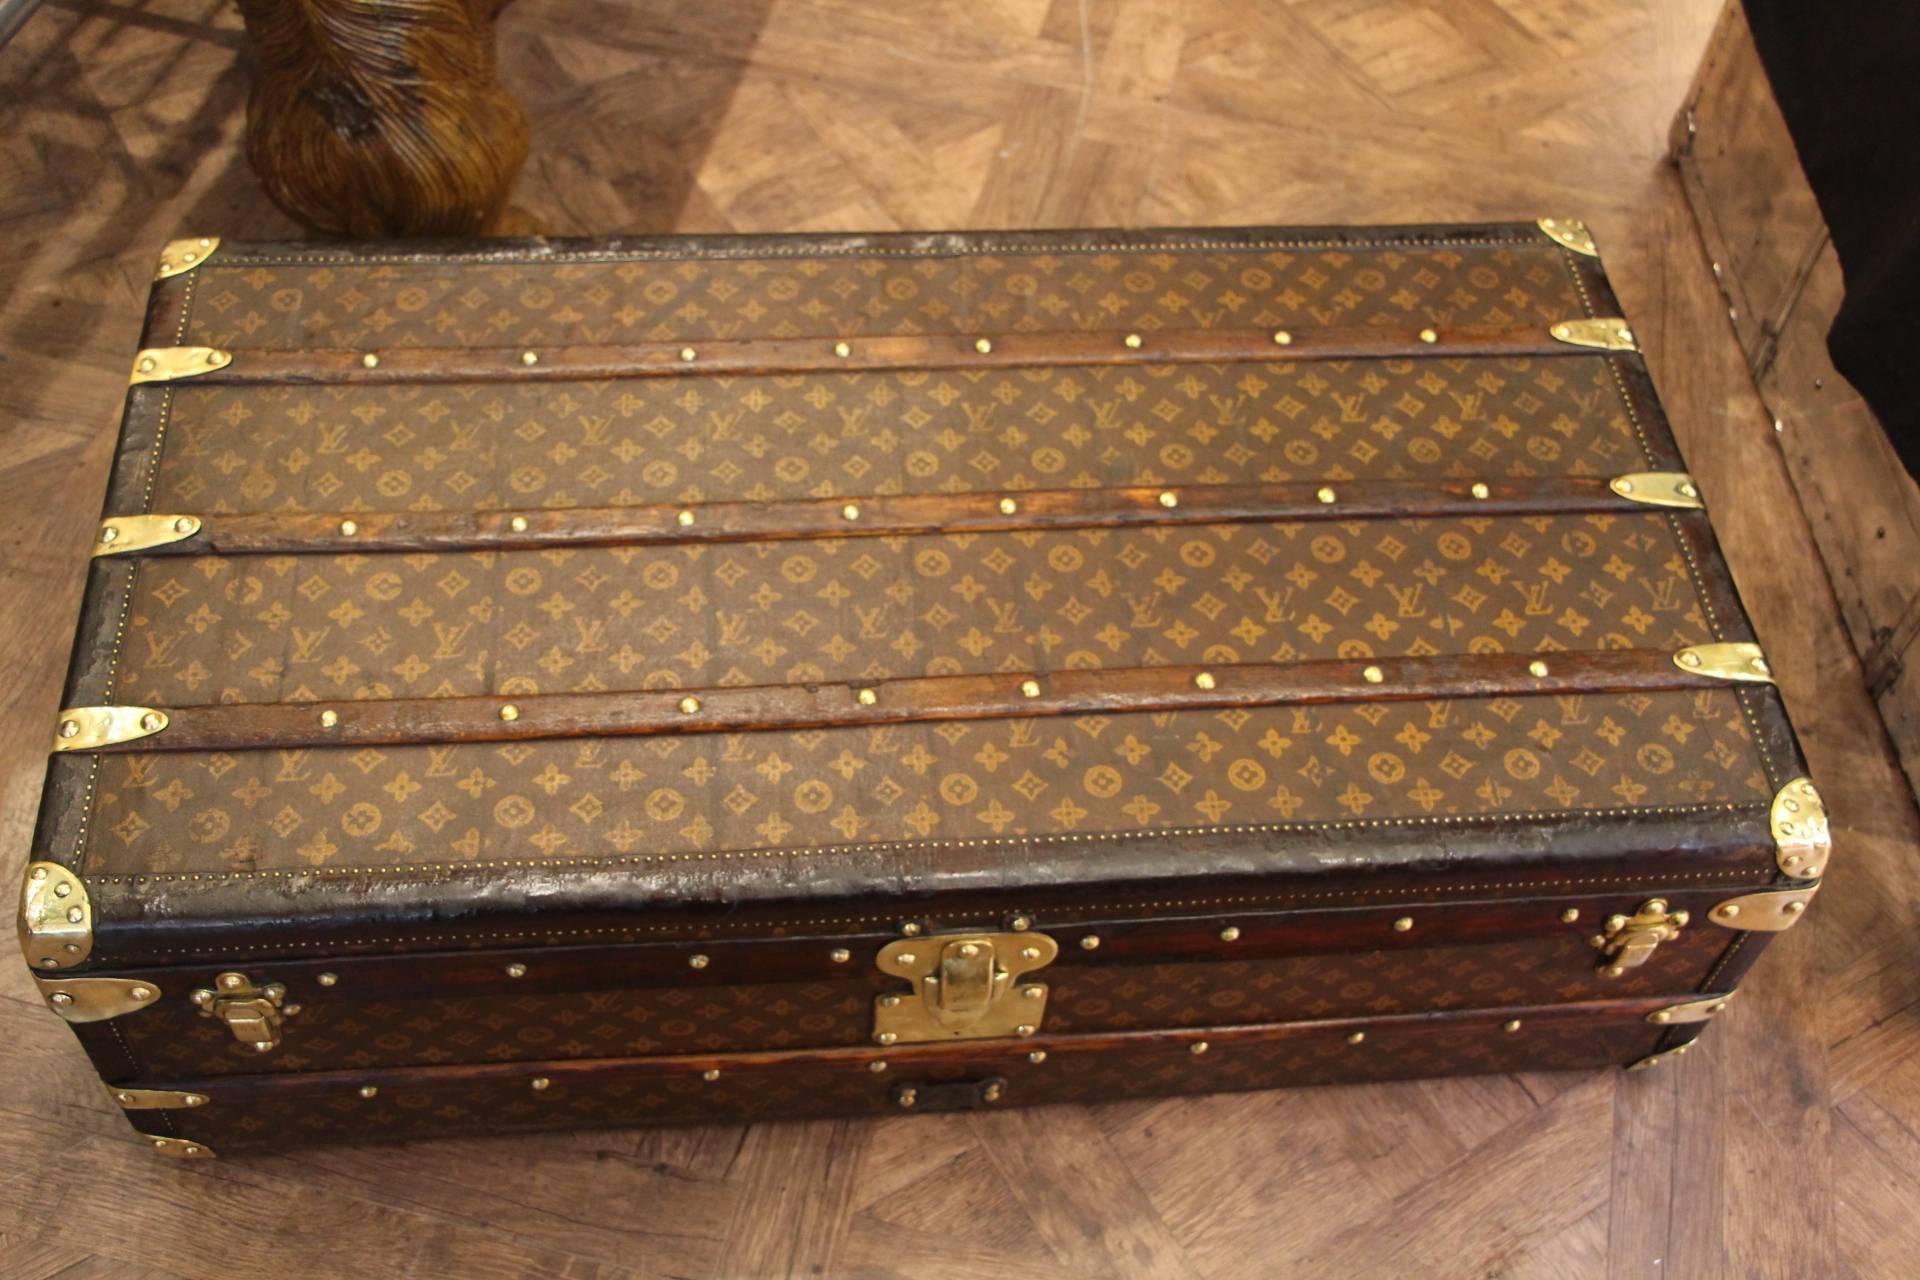 This steamer trunk is top of the range from Louis Vuitton.
It is a first edition one and features leather trim, brass locks, studs, corners and handles as well as stenciled monogramm canvas. Very elegant patina.
Original clean and nice interior with